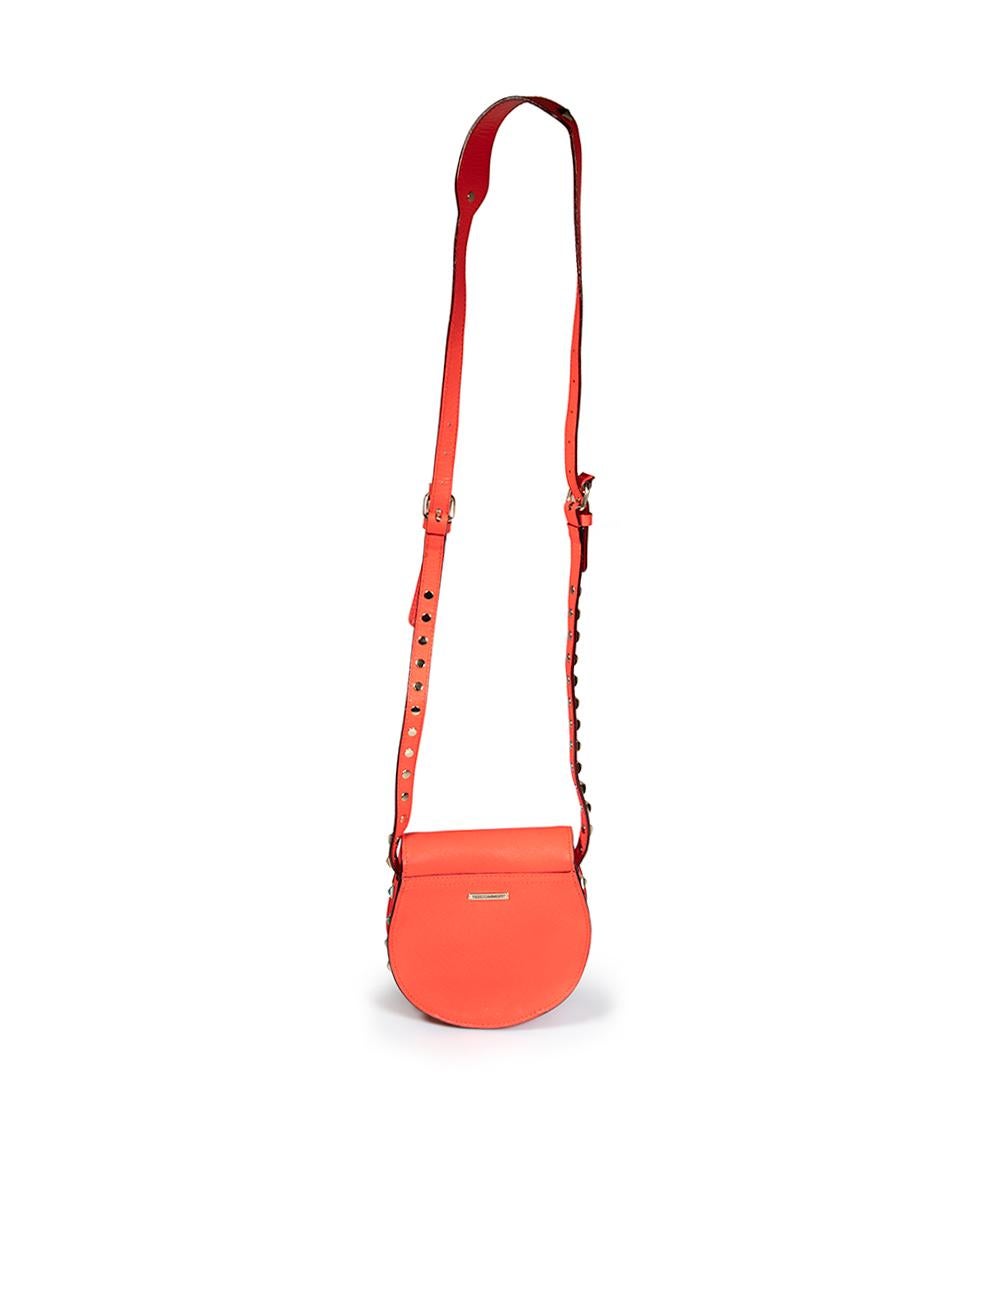 Rebecca Minkoff Red Leather Studded Crossbody Bag In Good Condition For Sale In London, GB